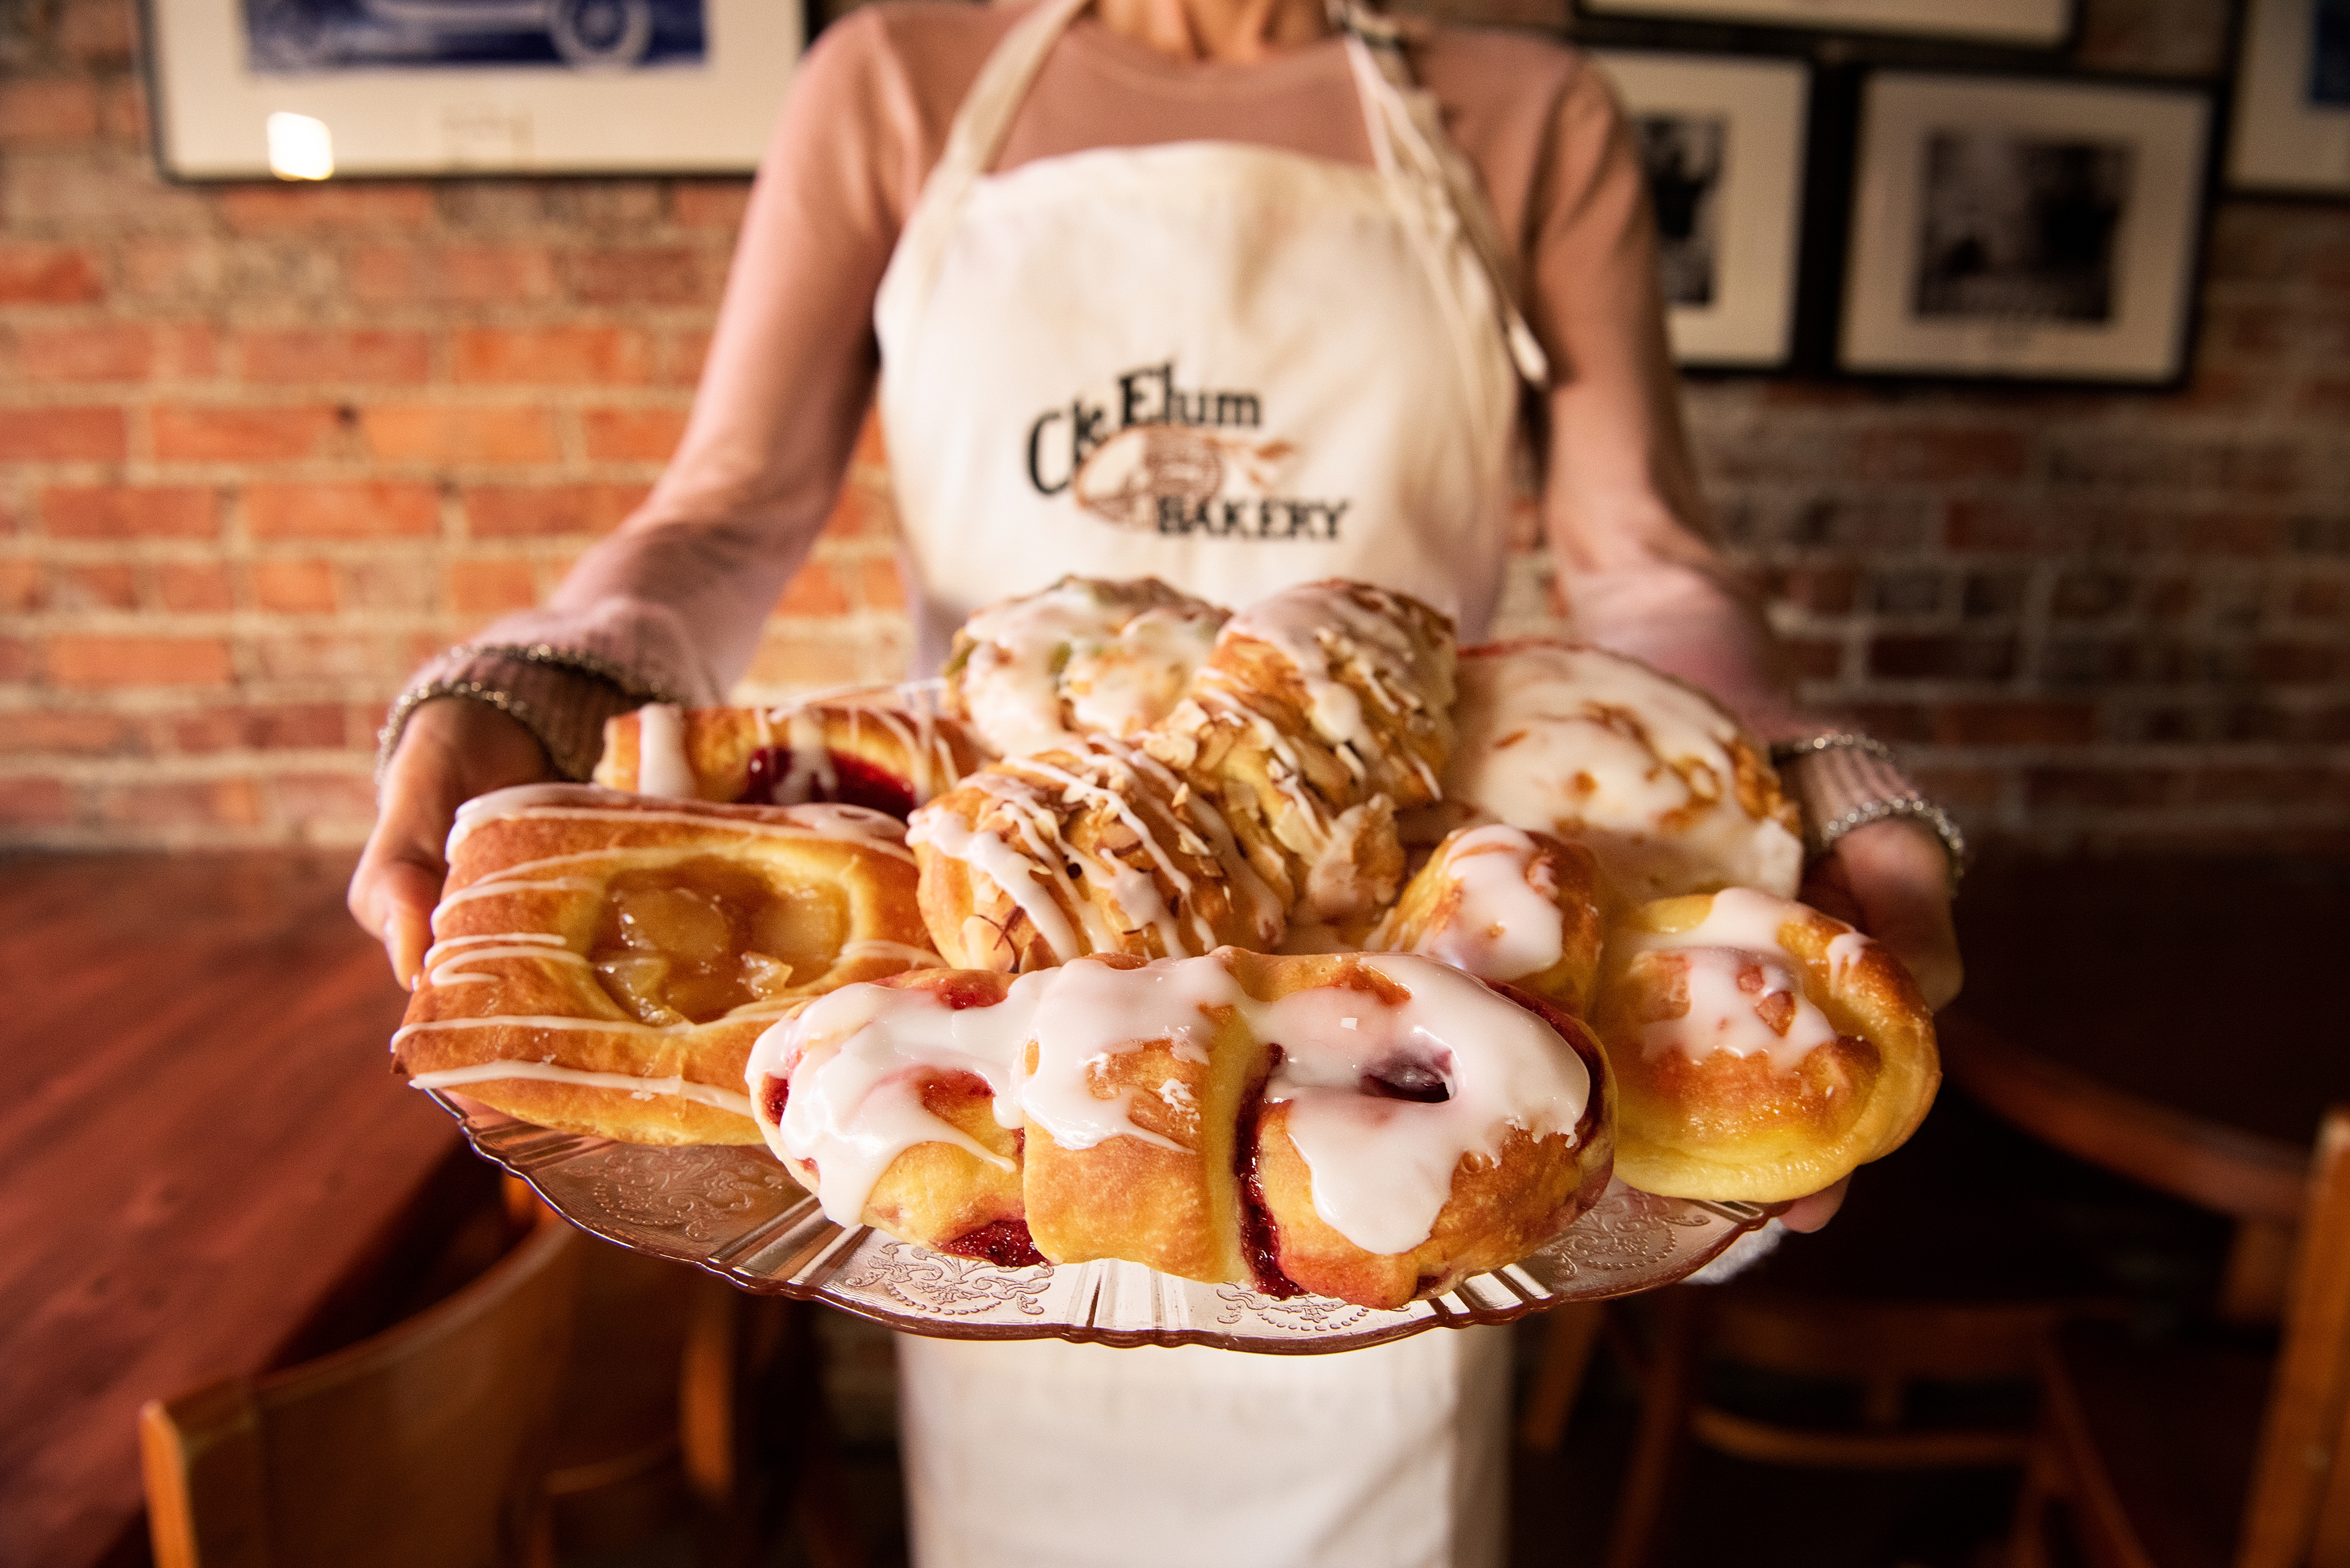 Pastries held on a platter at the Cle Elum Bakery, commercial photography by Mary Maletzke